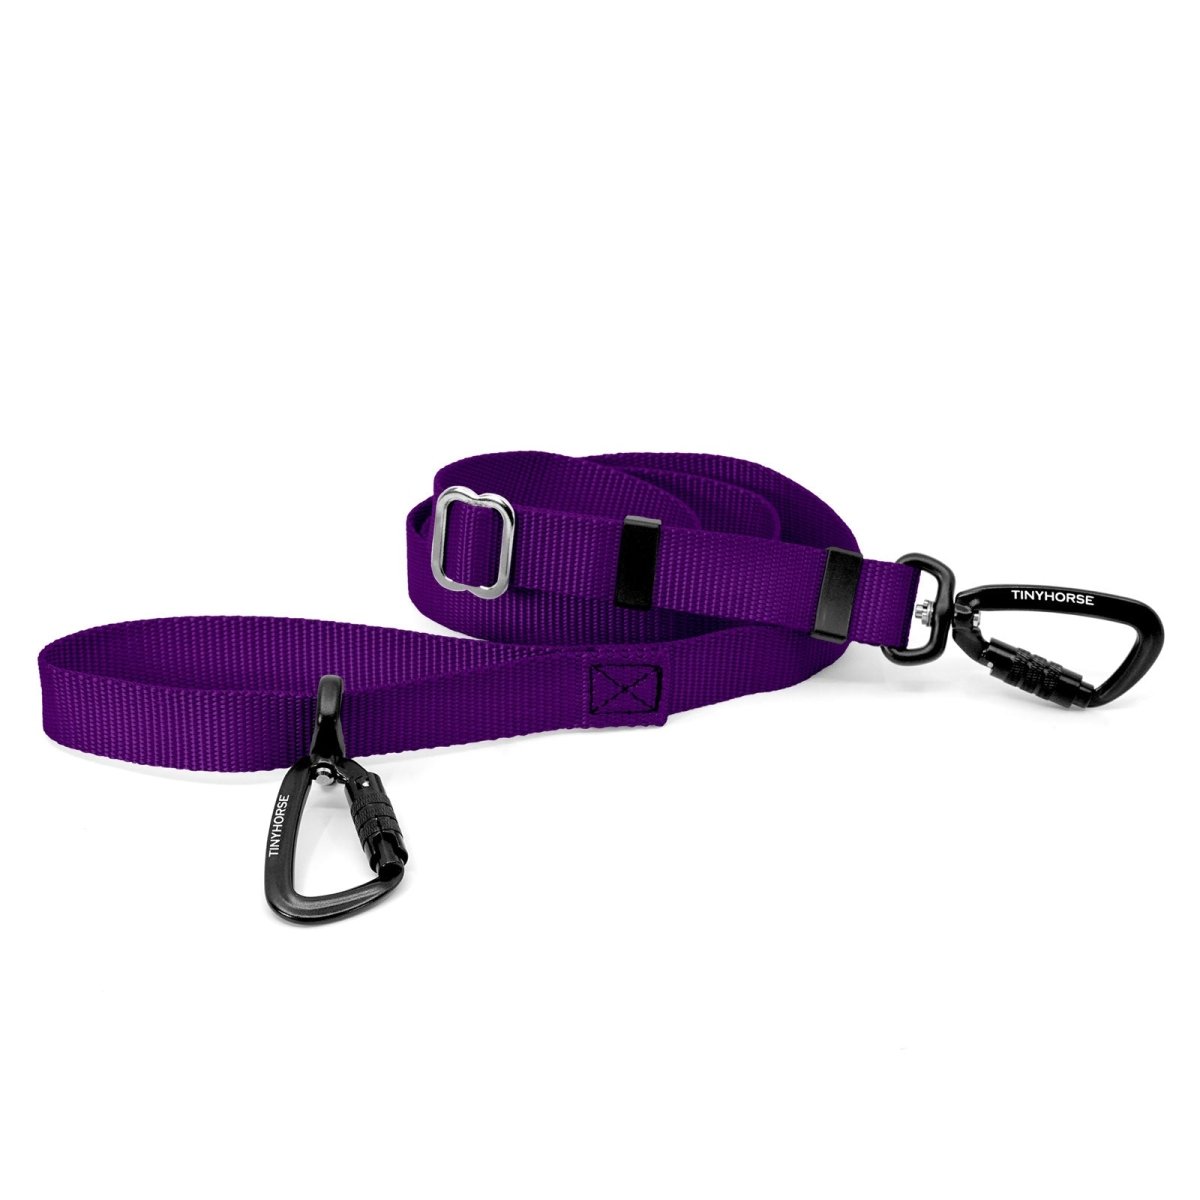 A purple-coloured Lead-All Lite Extra with an adjustable nylon webbing leash and 2 auto-locking carabiners